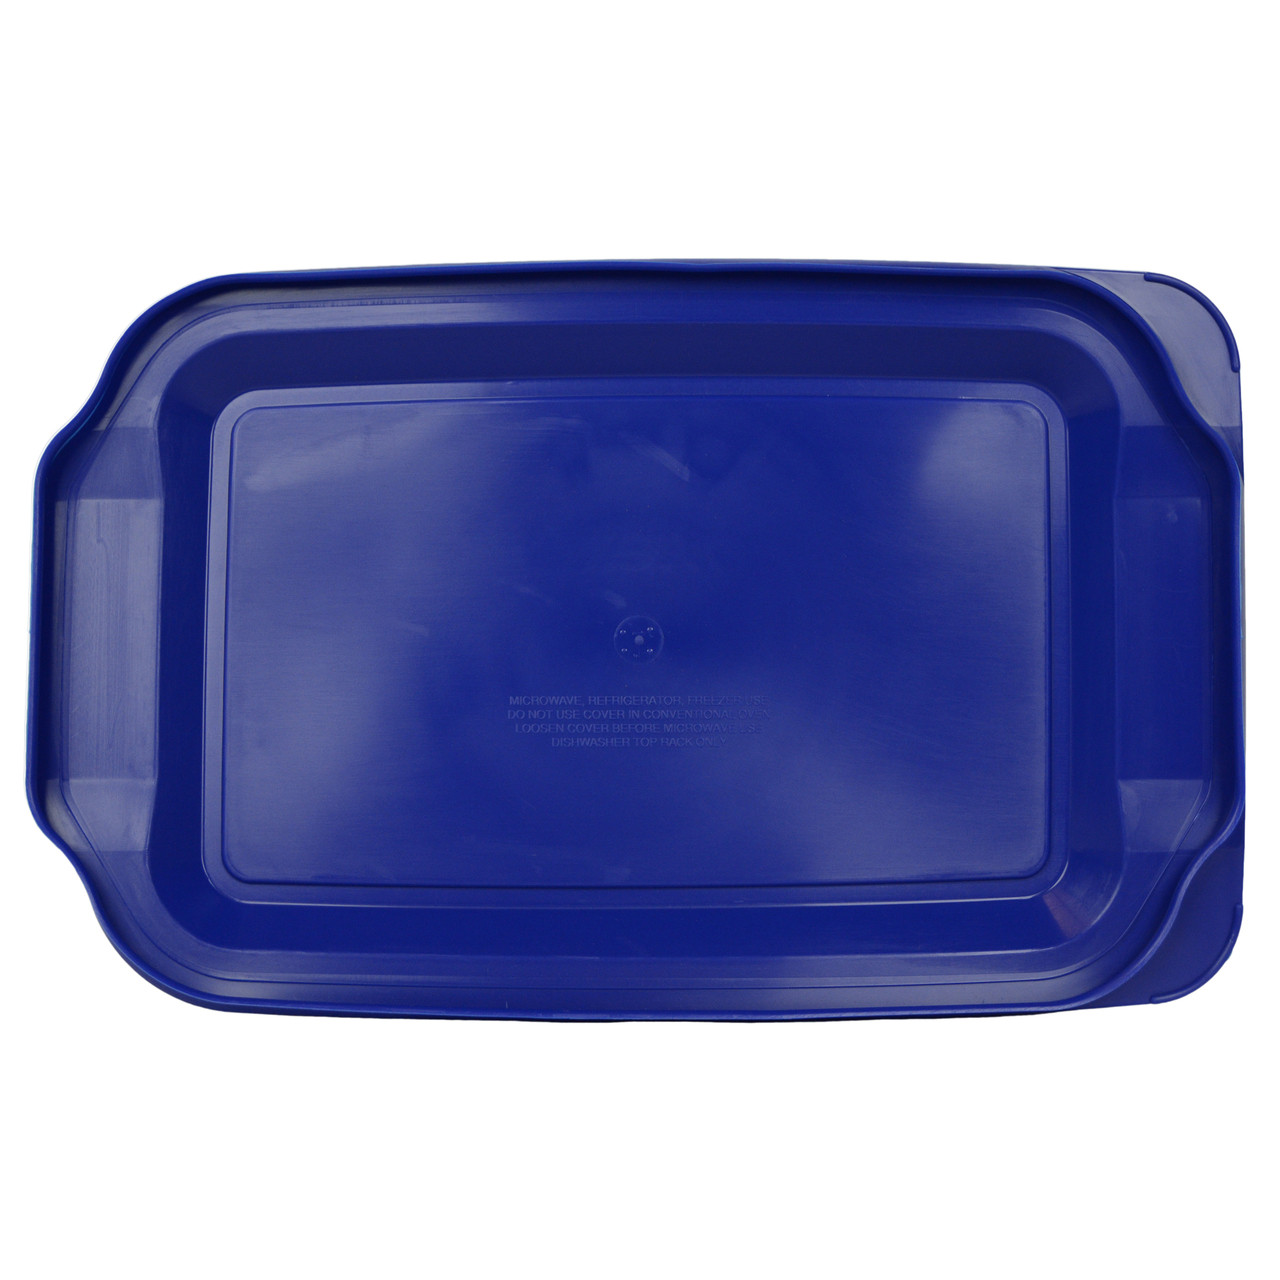 36 PC Food Storage Containers with Lid - Blue